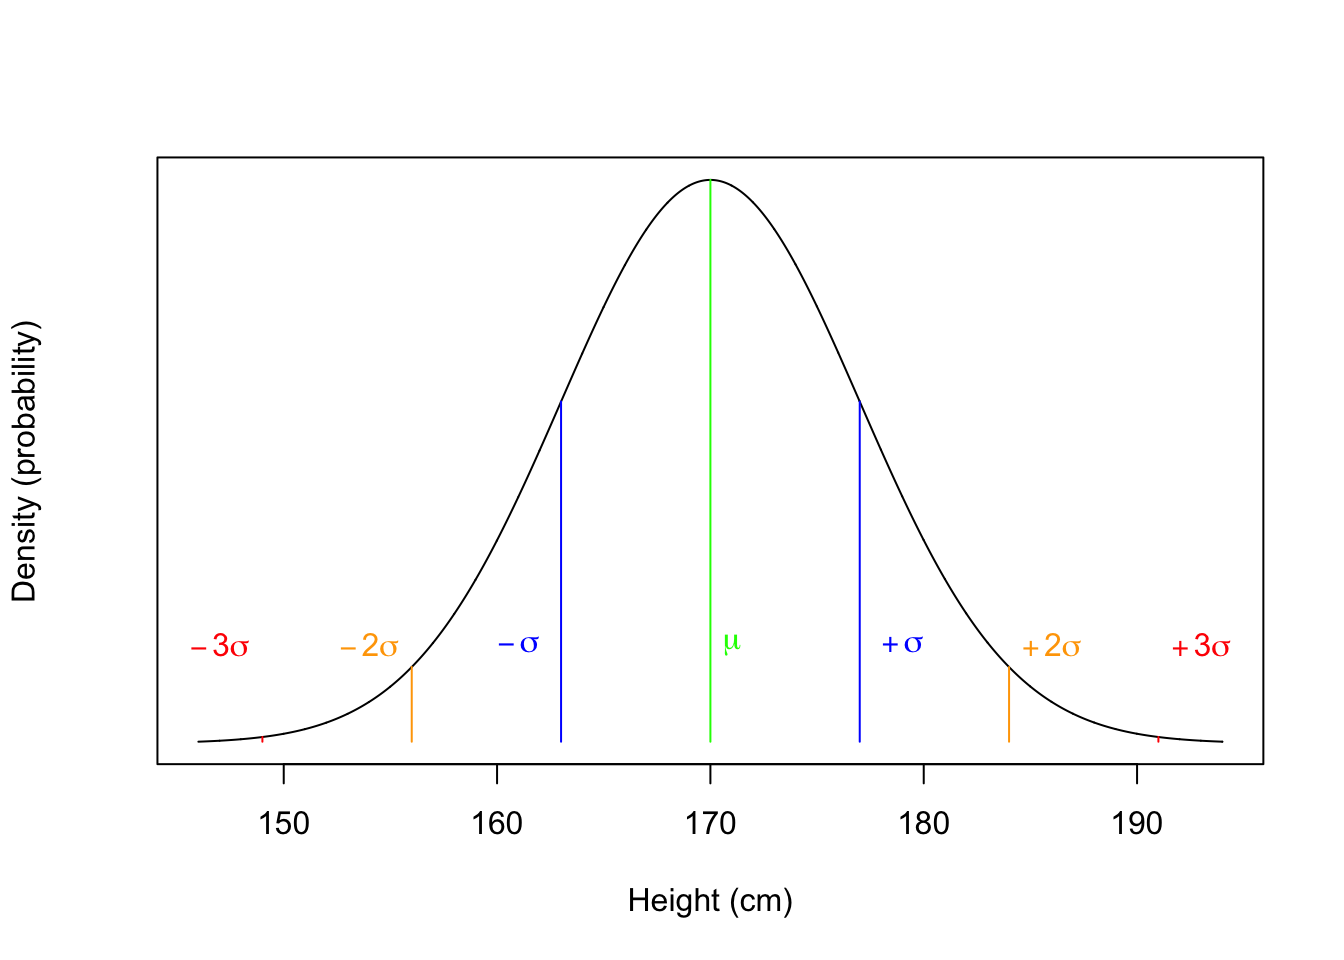 The Normal Distribution of height in Level 2 Psychology students (black line). Green line represents the mean. Blue line represent 1 Standard Deviation from the mean. Yellow line represents 2 Standard Deviation from the mean. Red line represents 3 Standard Deviation from the mean.